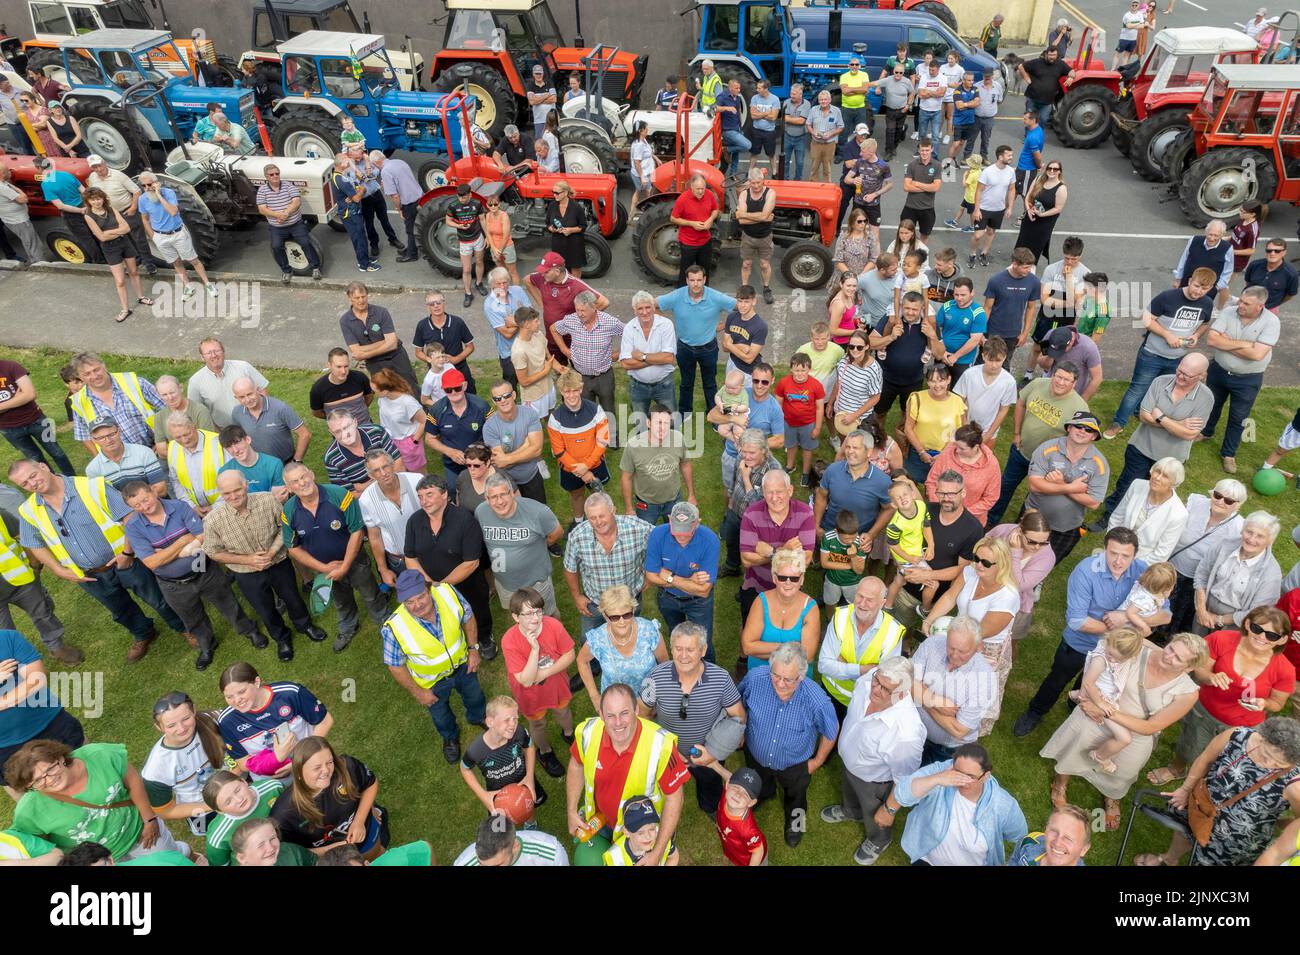 Drone image of crowd of people at a charity event in Cahersiveen, County Kerry, Ireland Stock Photo